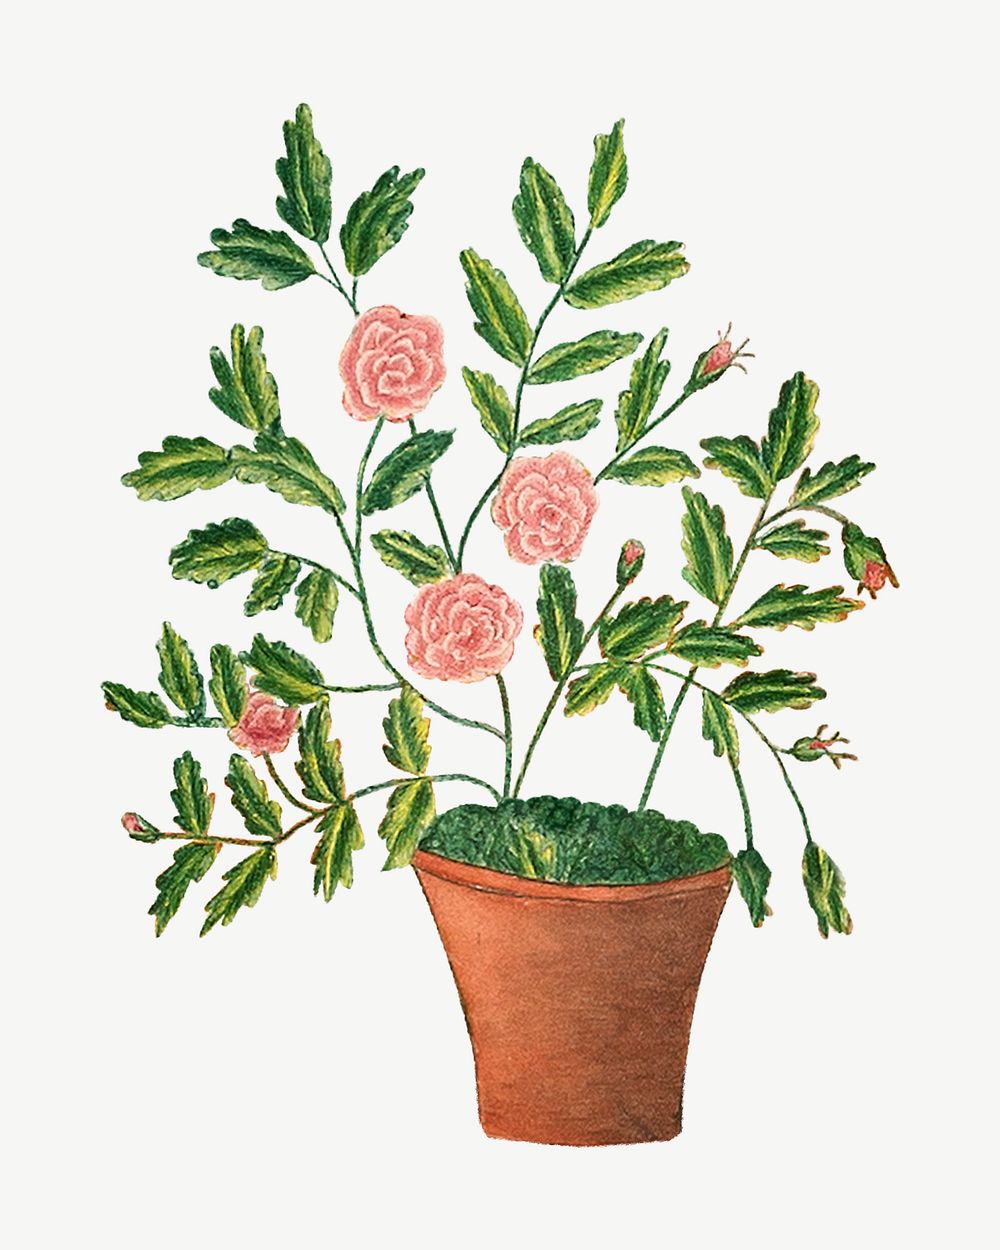 Potted rose flower, vintage botanical illustration psd by Sarah P. Wells. Remixed by rawpixel.